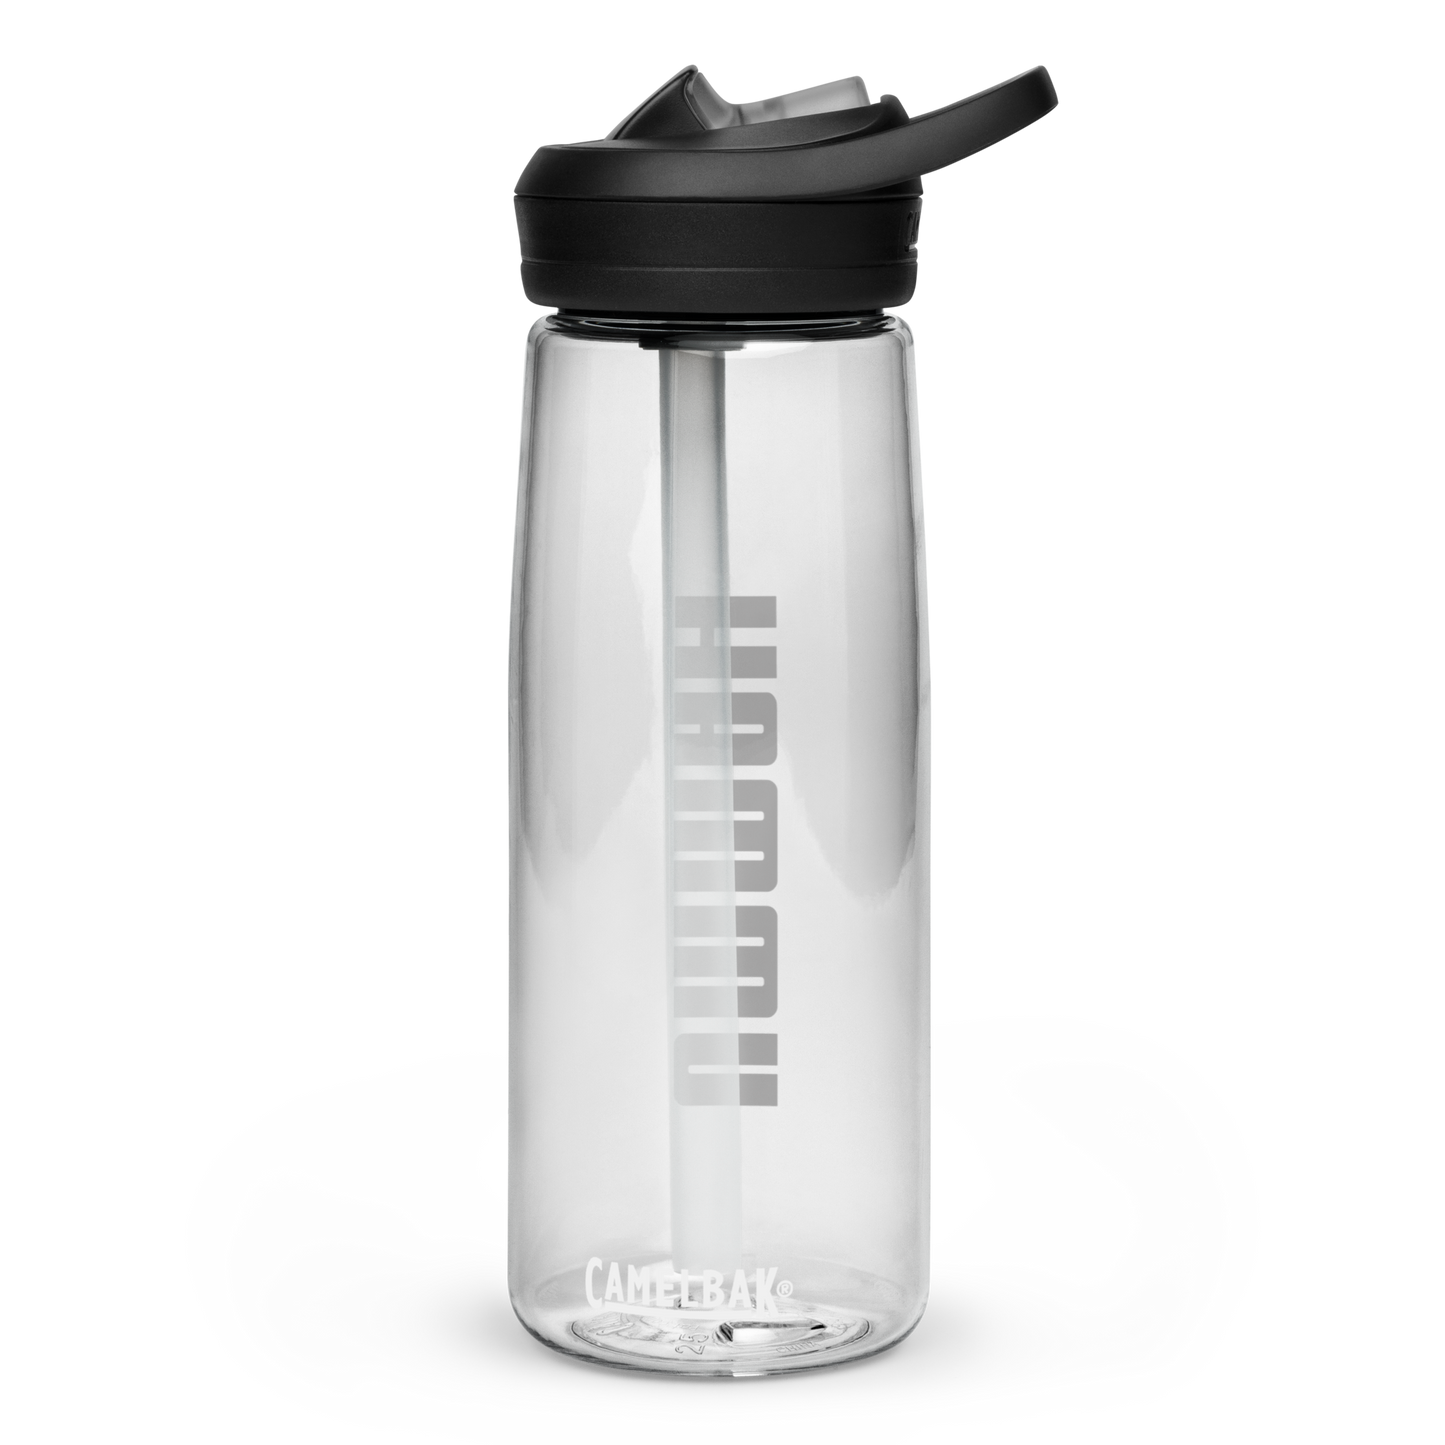 DRINK Water Bottle w/ Lid and Straw - UMMAH (Centered/Large) - White